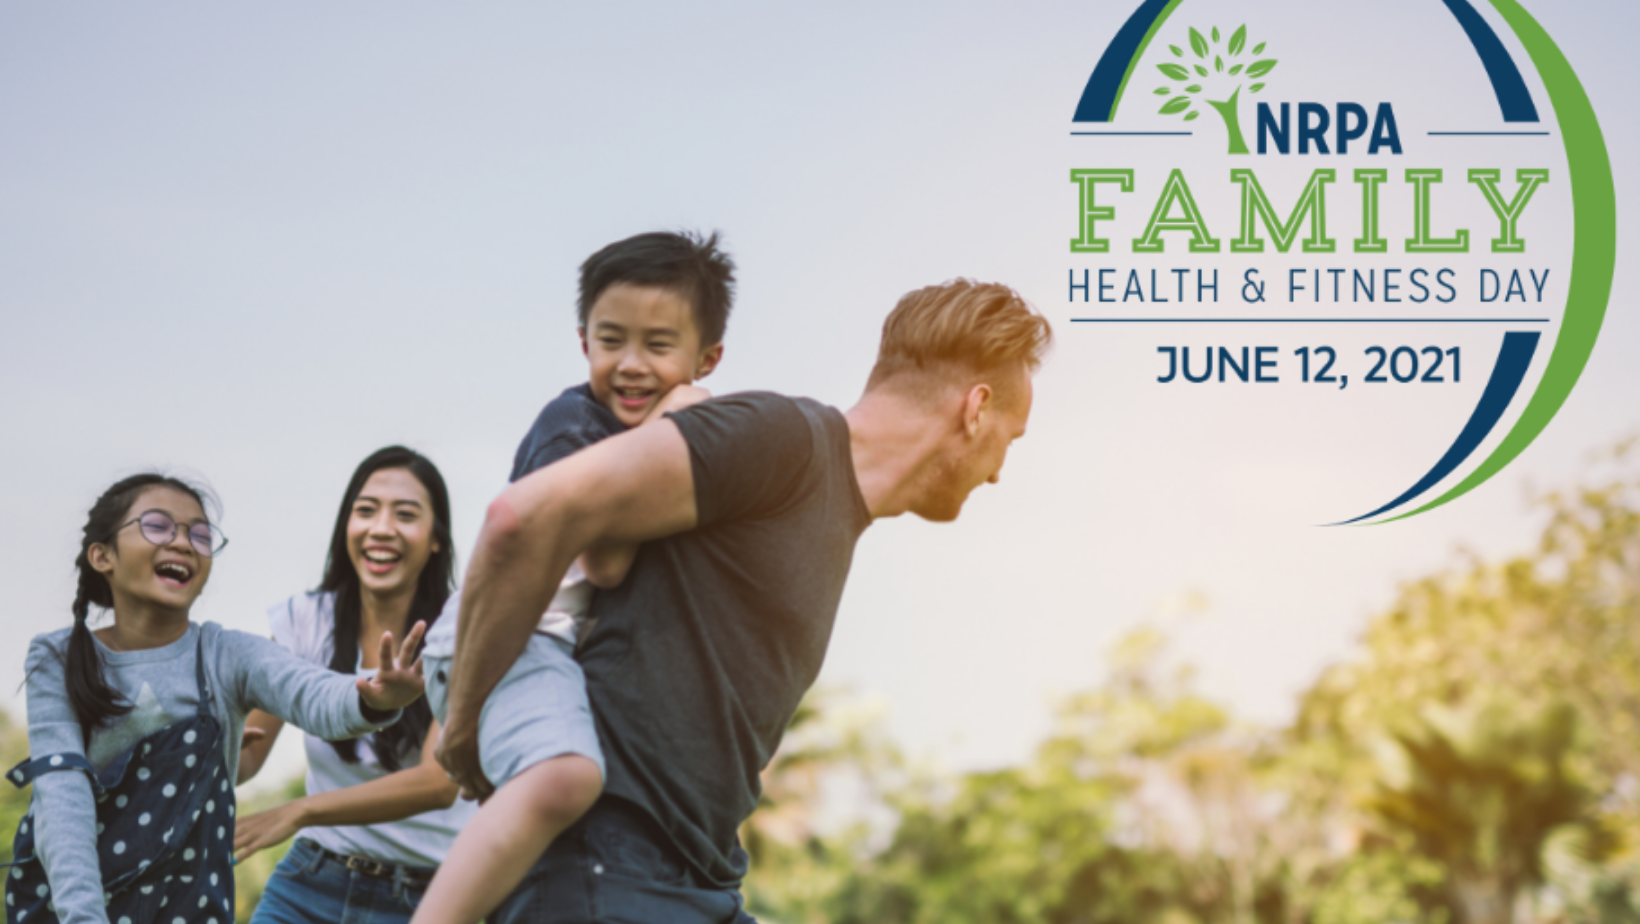 Family health and fitness day